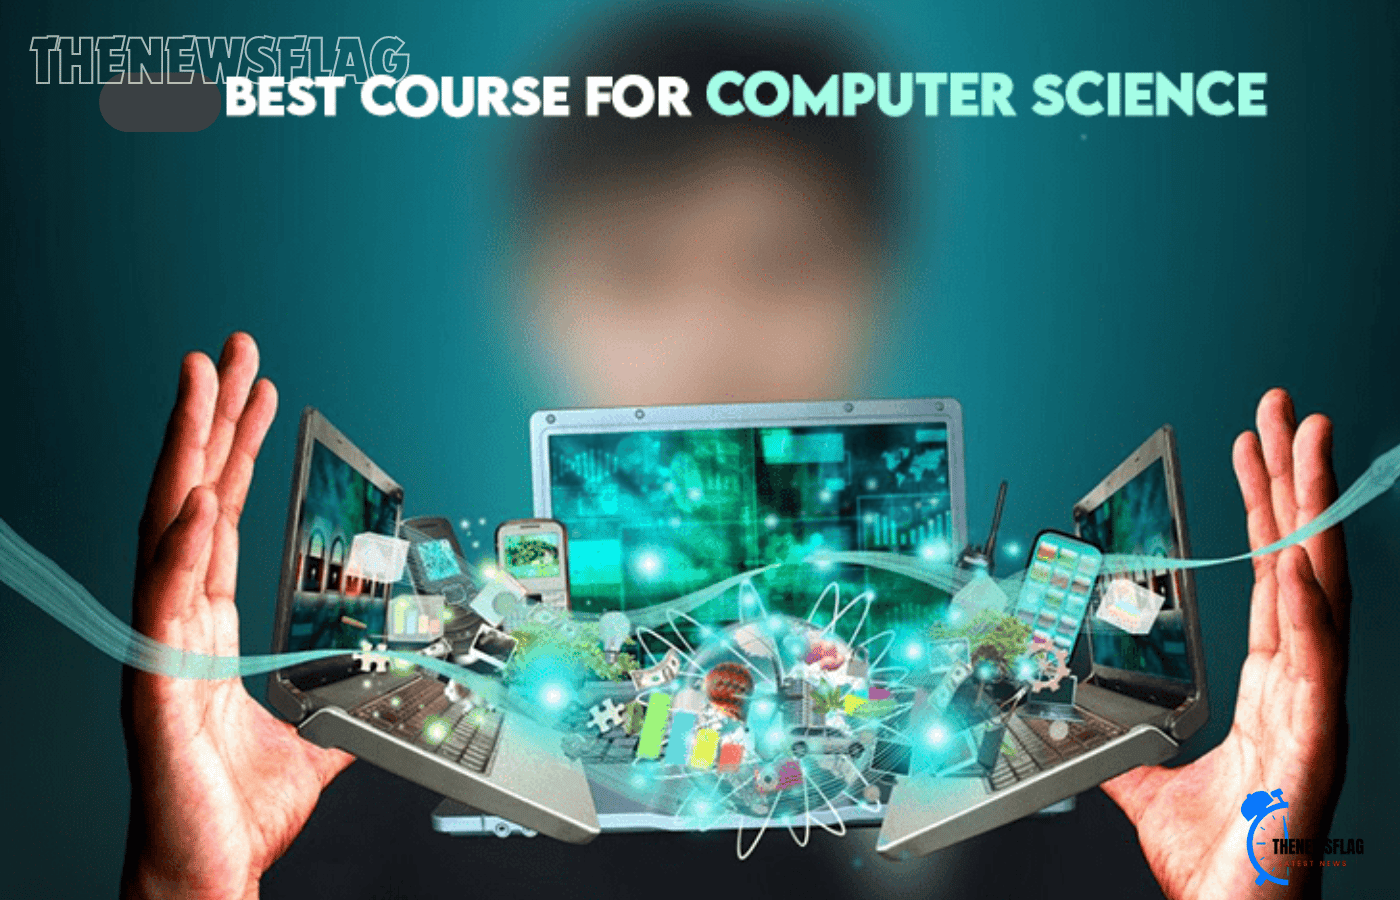 Launch of India's First Computer Science Education Microcredit Course Based on Outcomes